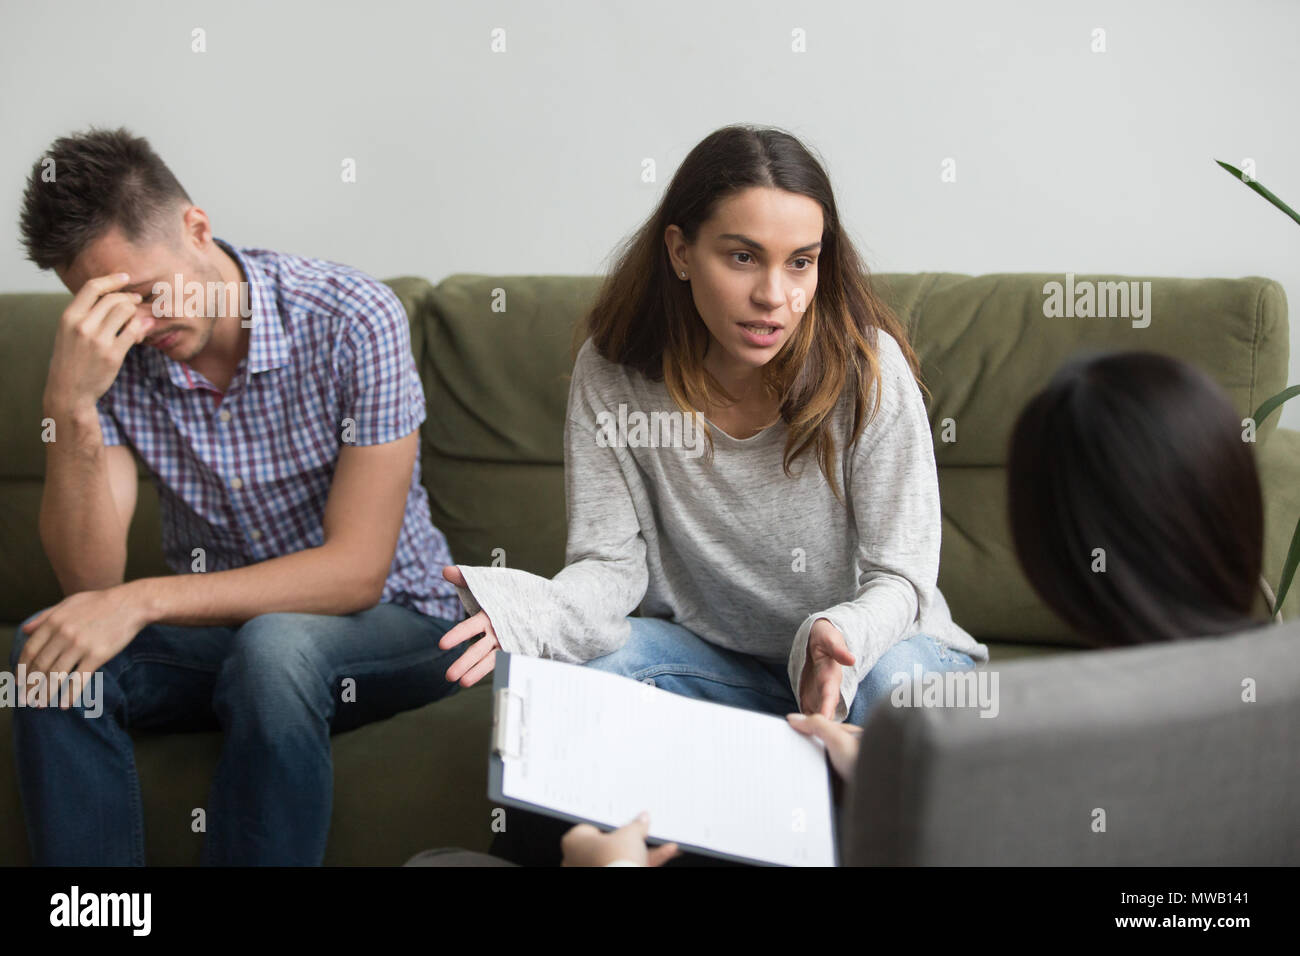 Unhappy frustrated woman sharing problems with counselor, couple Stock Photo